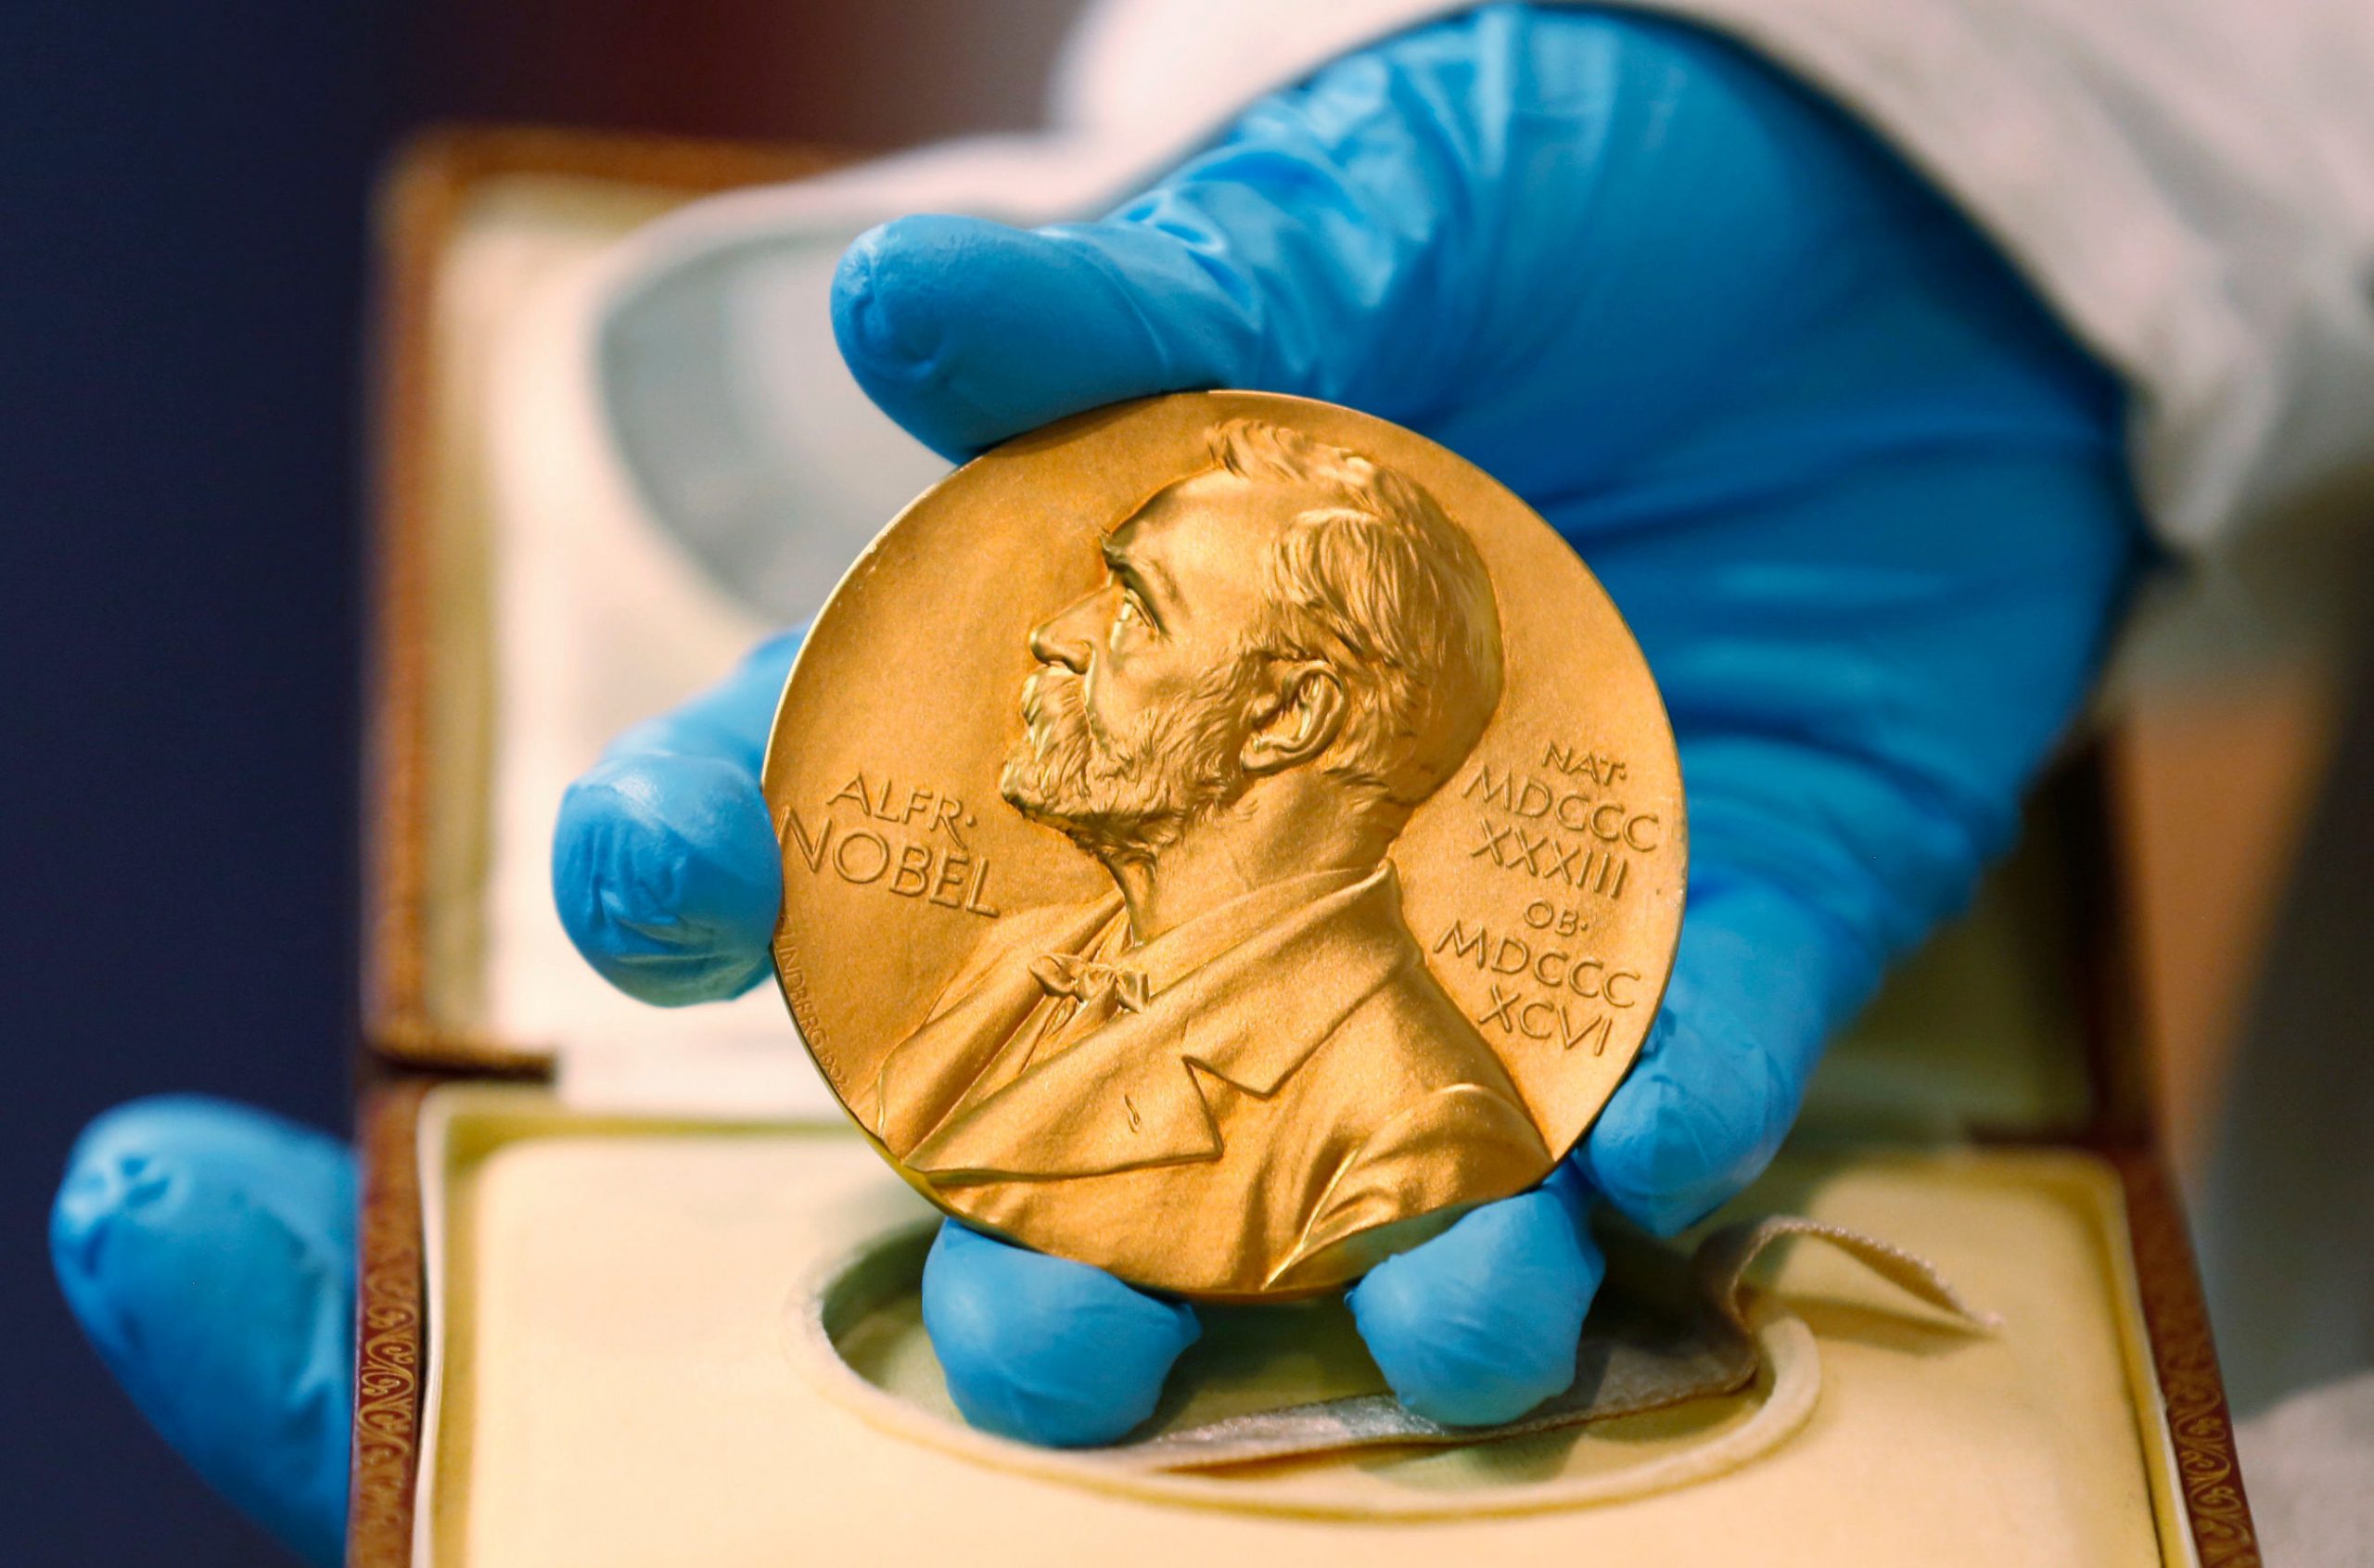 Nobel Prize 2022: 3 lesser-known facts about the award